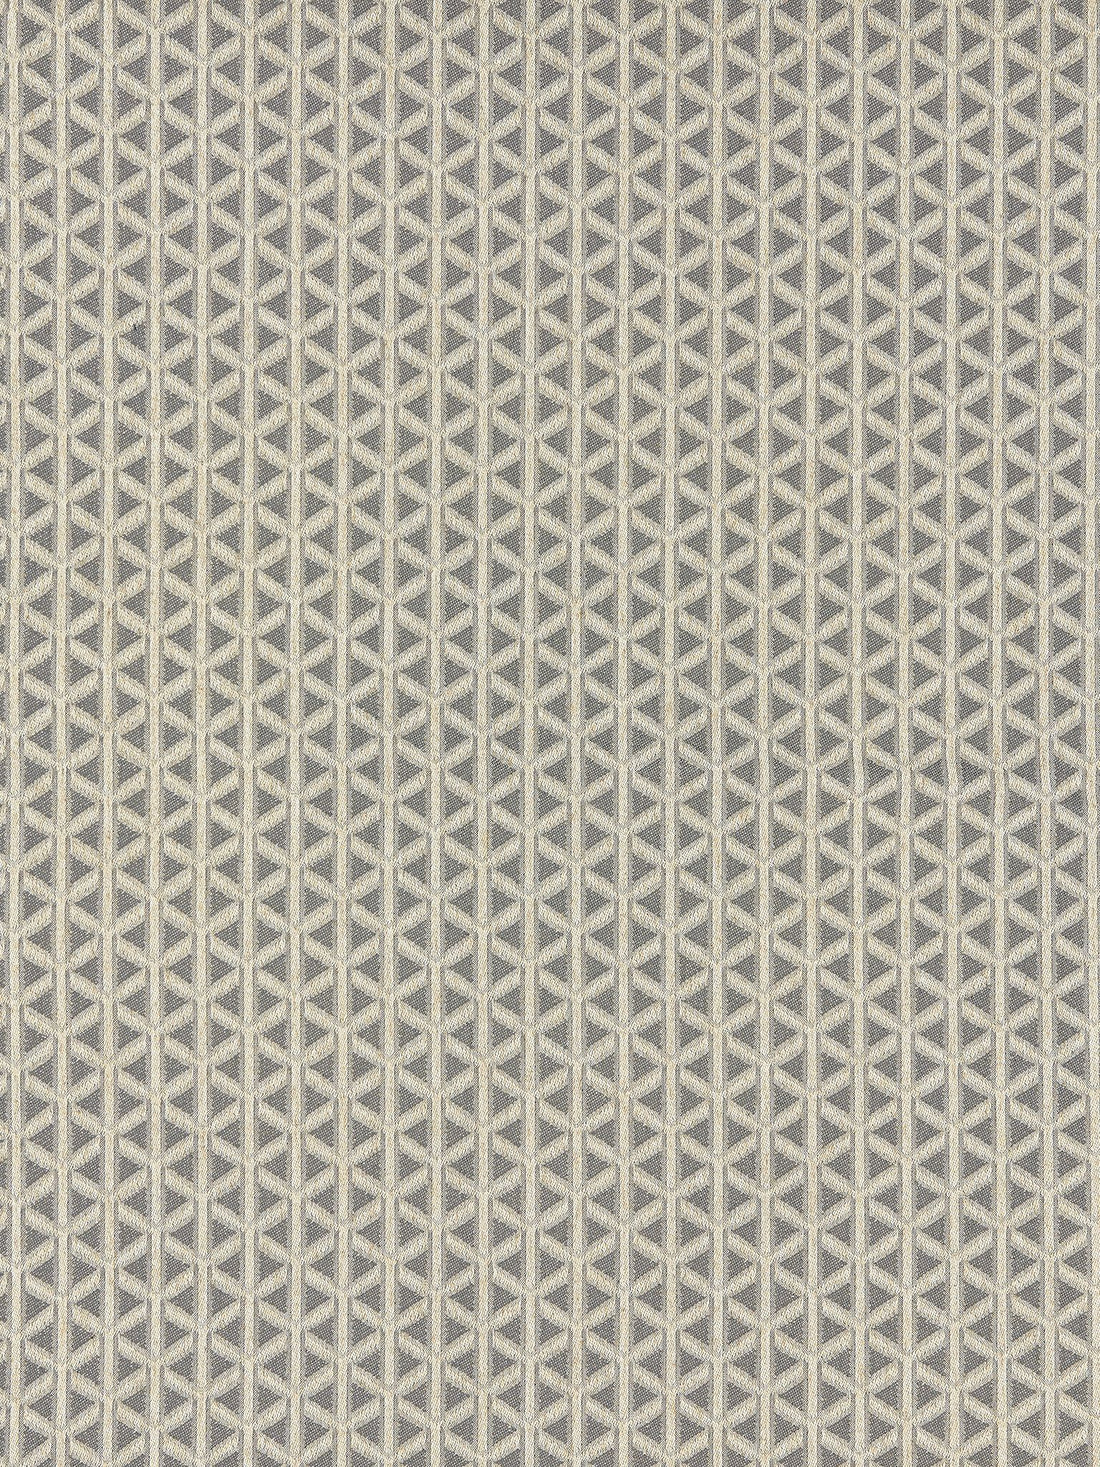 Cross Channel fabric in newsprint color - pattern number NK 0007CROS - by Scalamandre in the Old World Weavers collection